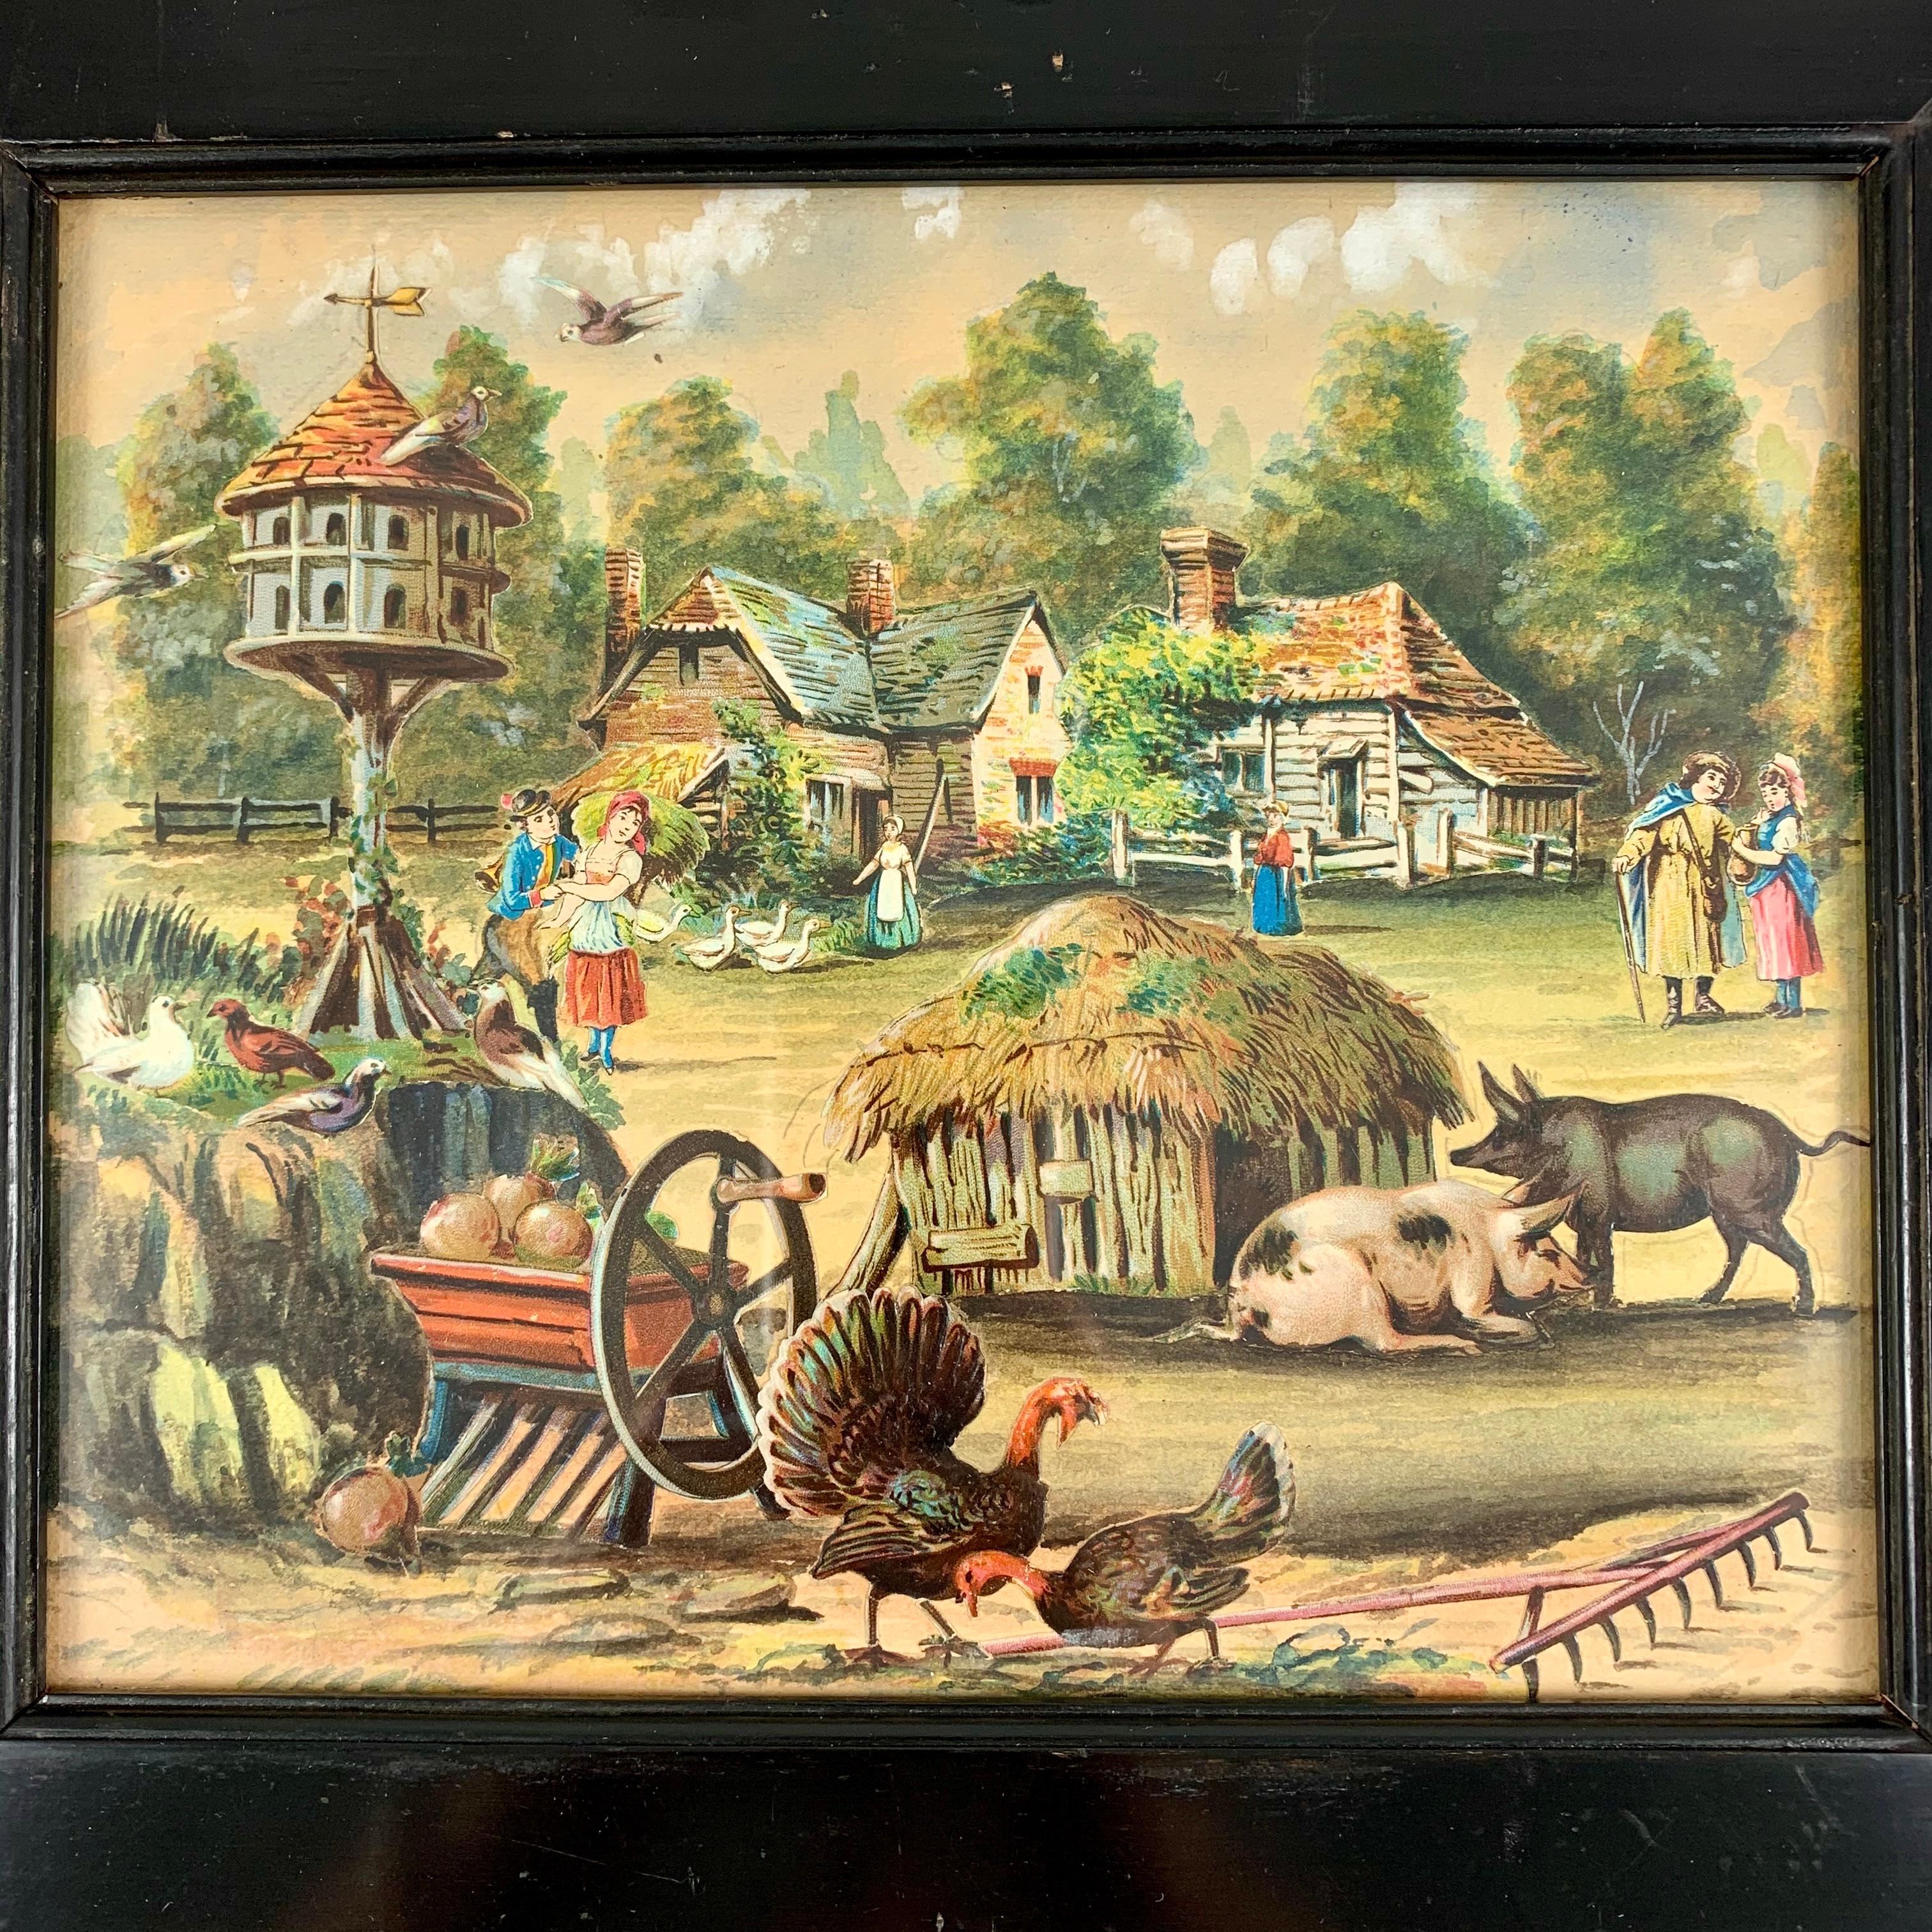 An original British School Decalomania decorative art watercolor and cut paper farm scene mounted in a heavy black wood frame, circa 1860.

These were largely created by young girls from English aristocratic families during the late Georgian to